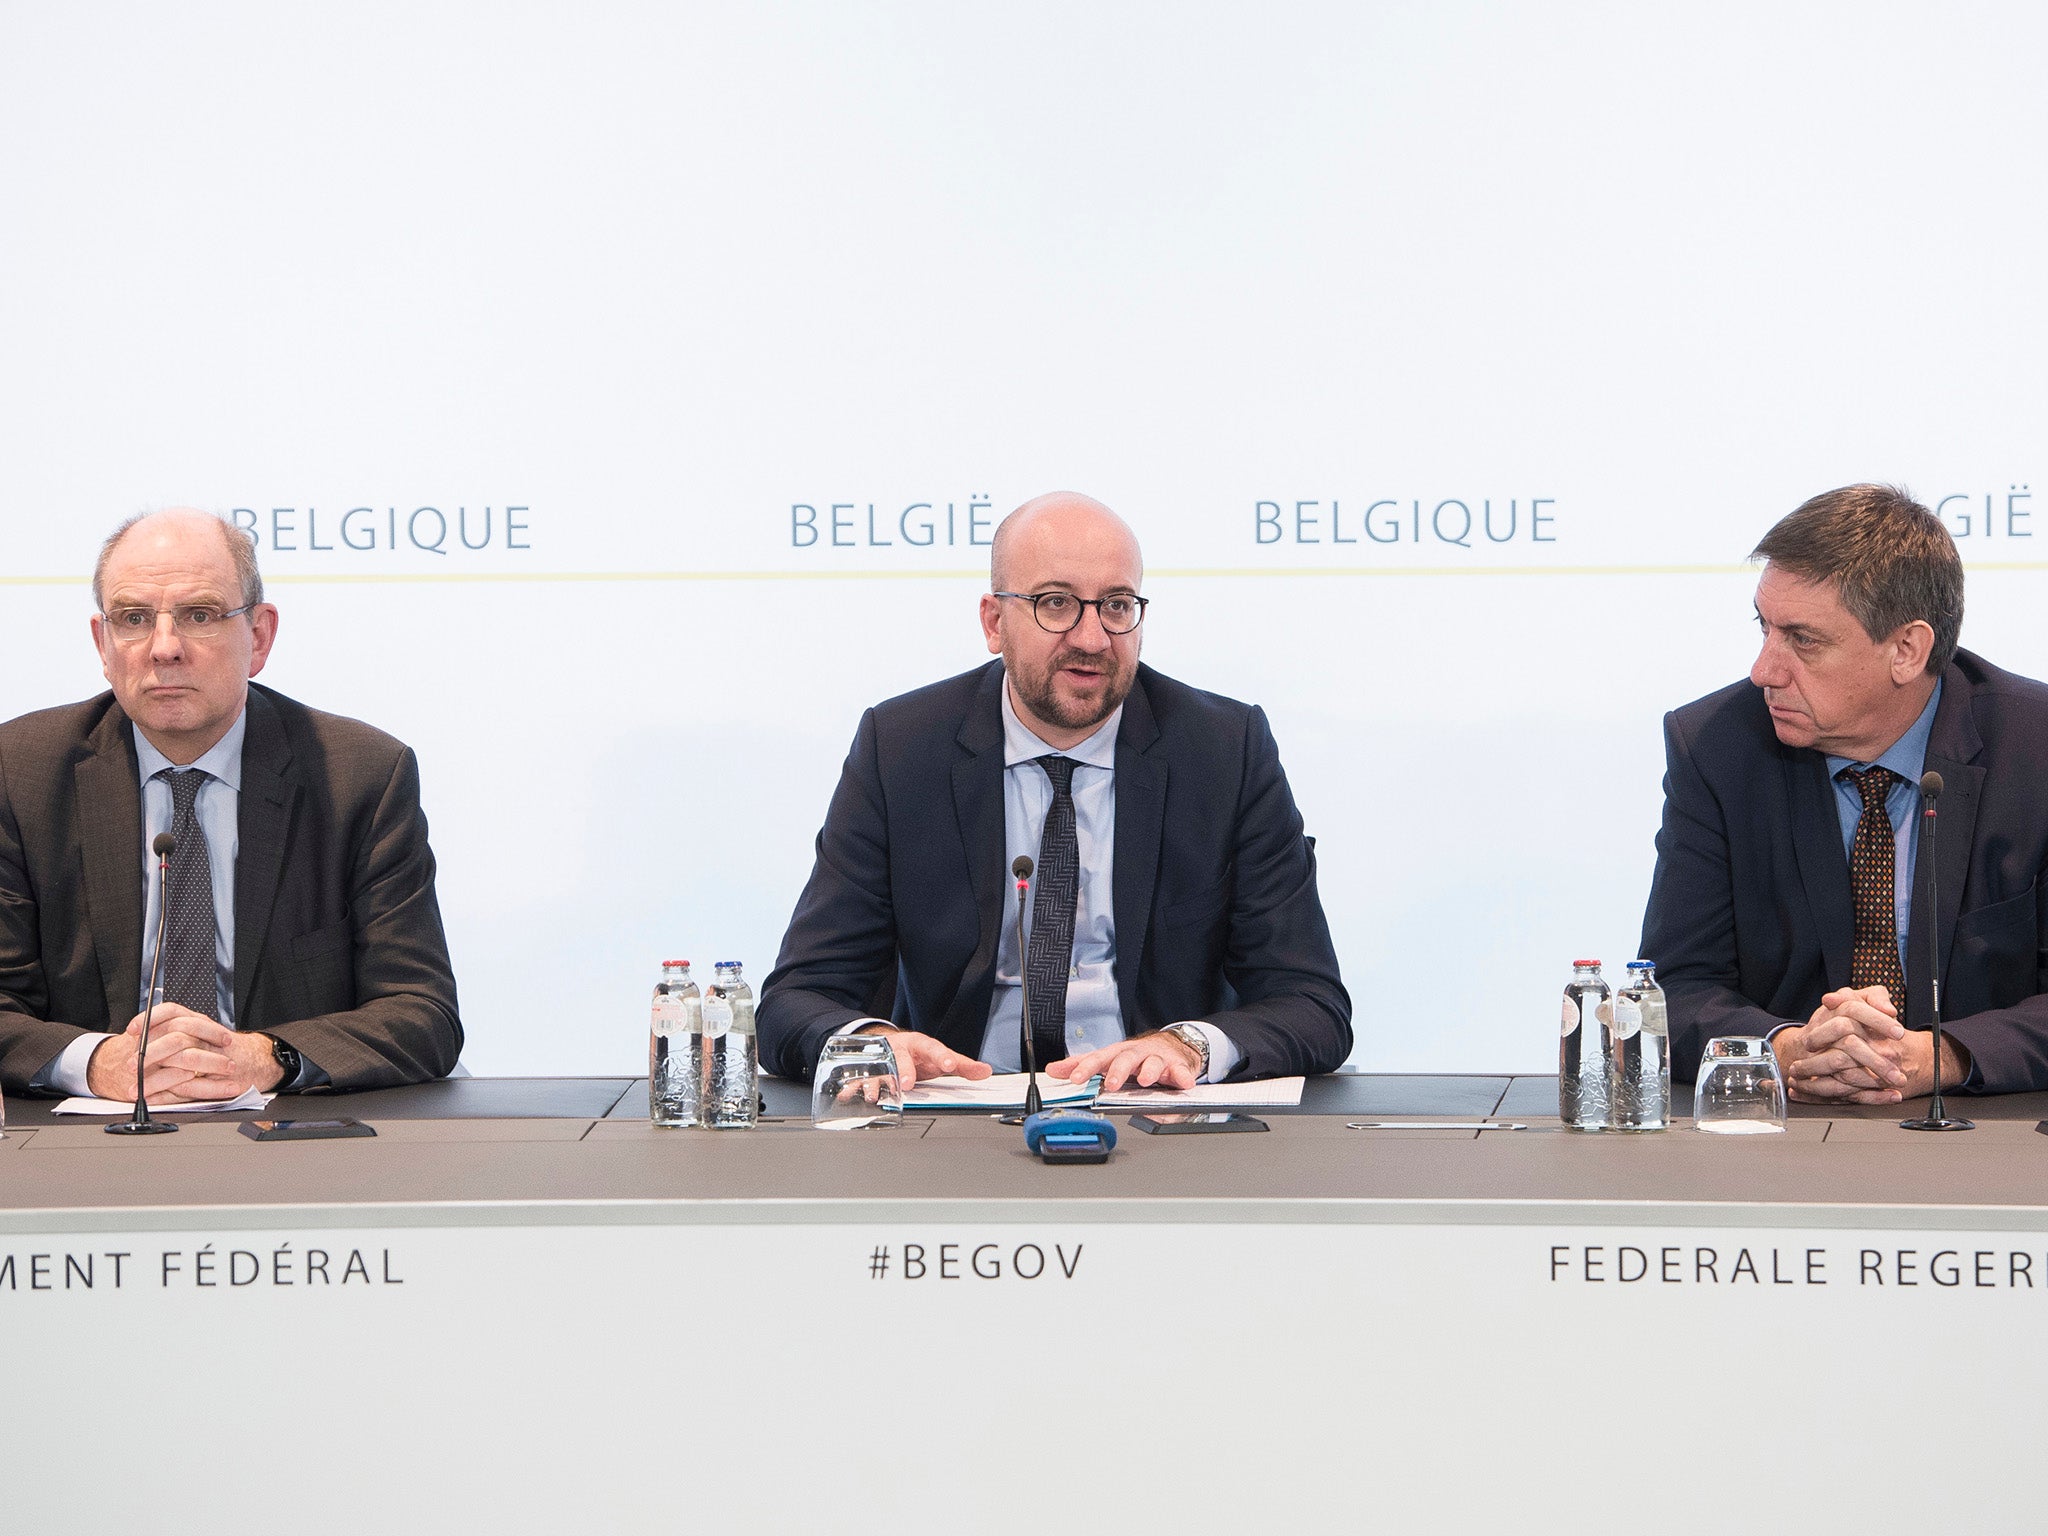 (L to R) Belgian Justice minister Koen Geens, Belgian Prime Minister Charles Michel and Vice-Prime Minister and Interior minister Jan Jambon